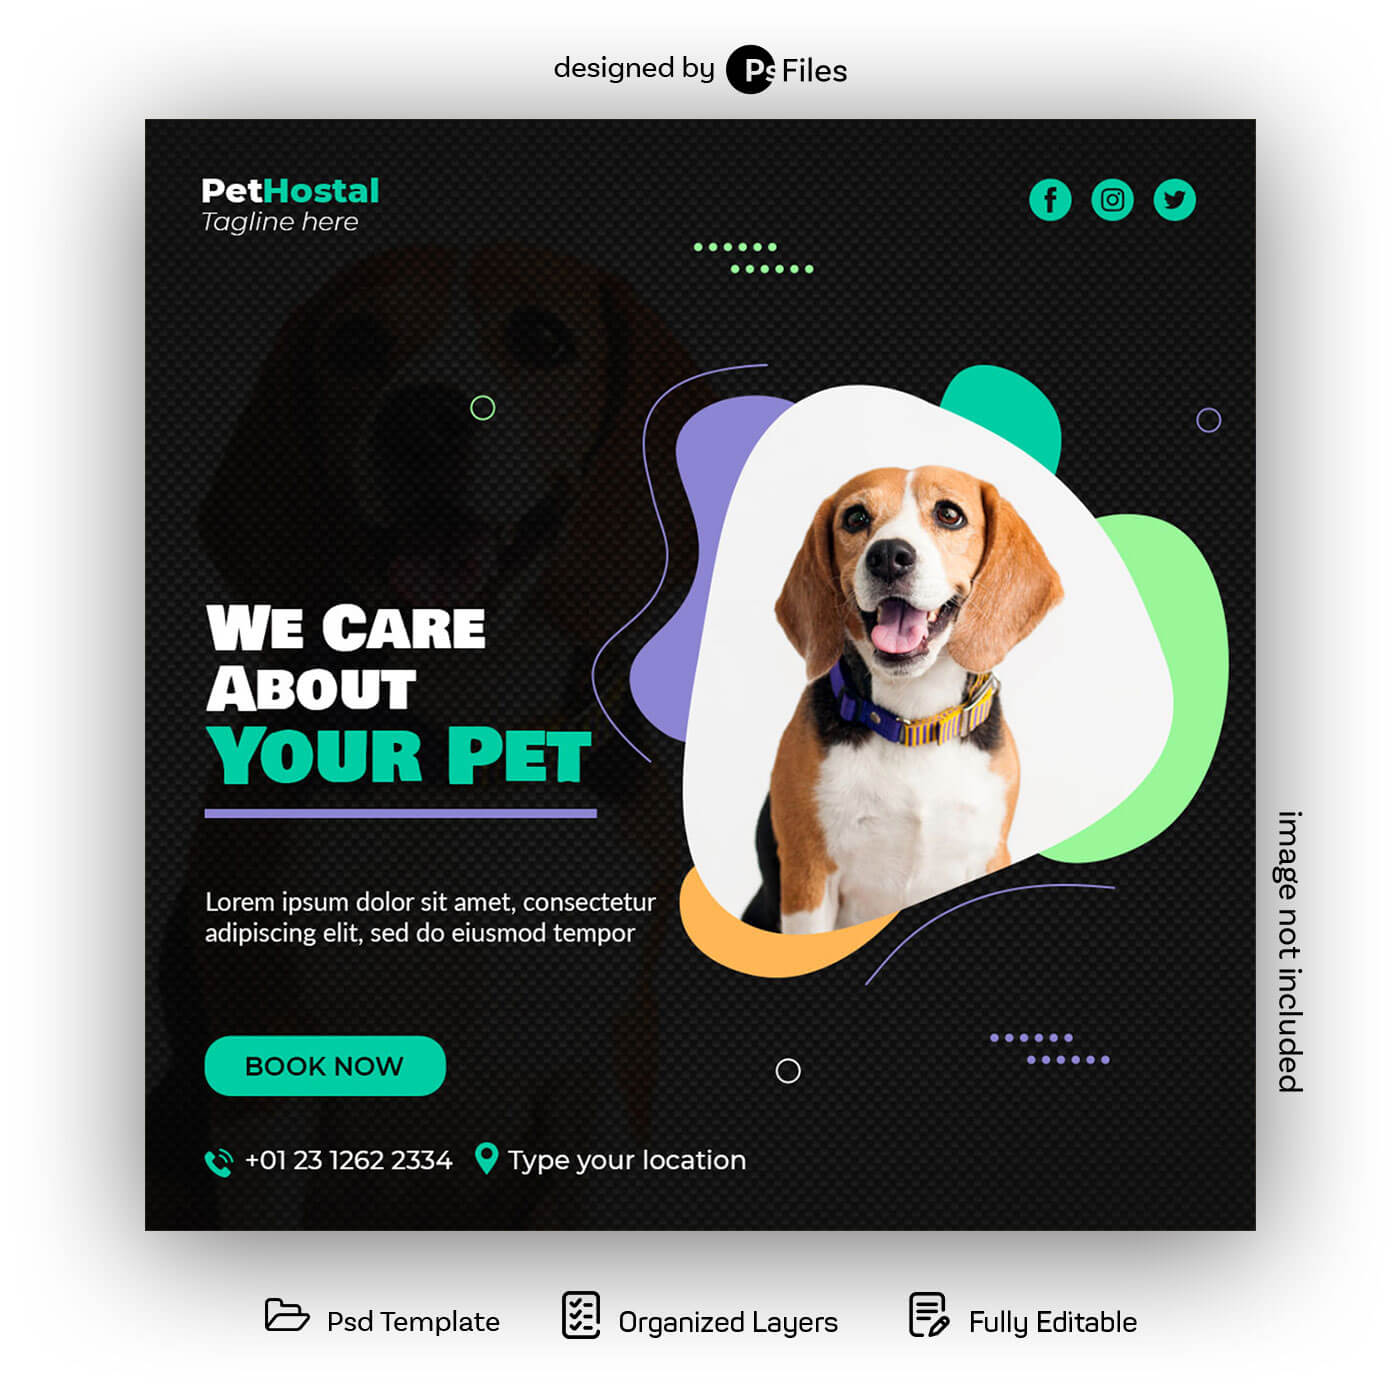 Psfiles_Free Pets Care Social Media Post Design Template PSD 10